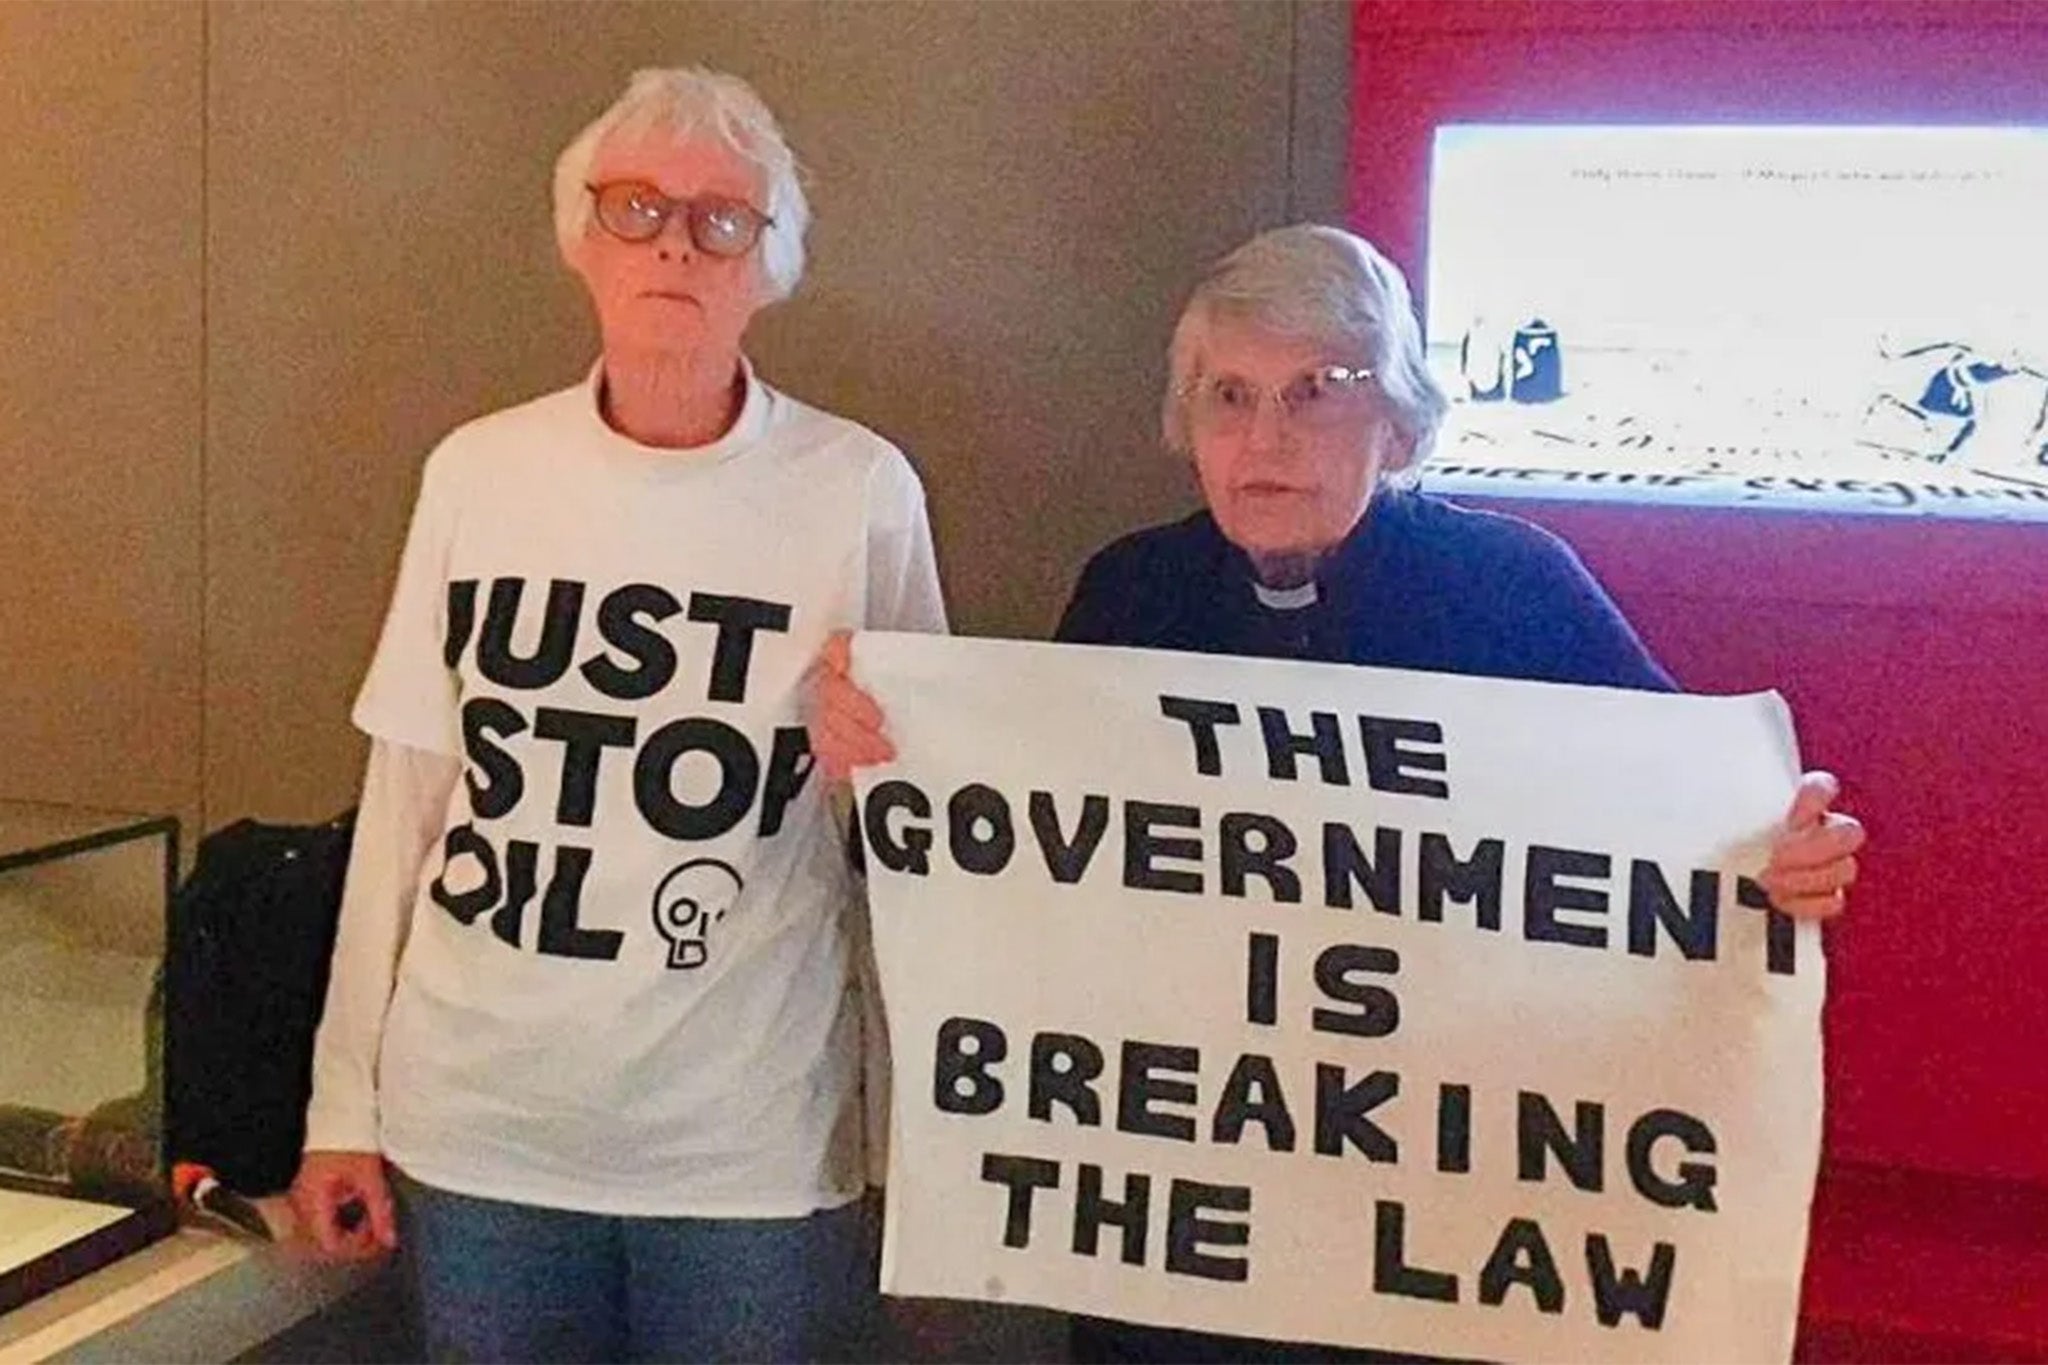 Two women, aged 82 and 85, have been charged over a protest in London which saw them attempt to get access to the Magna Carta